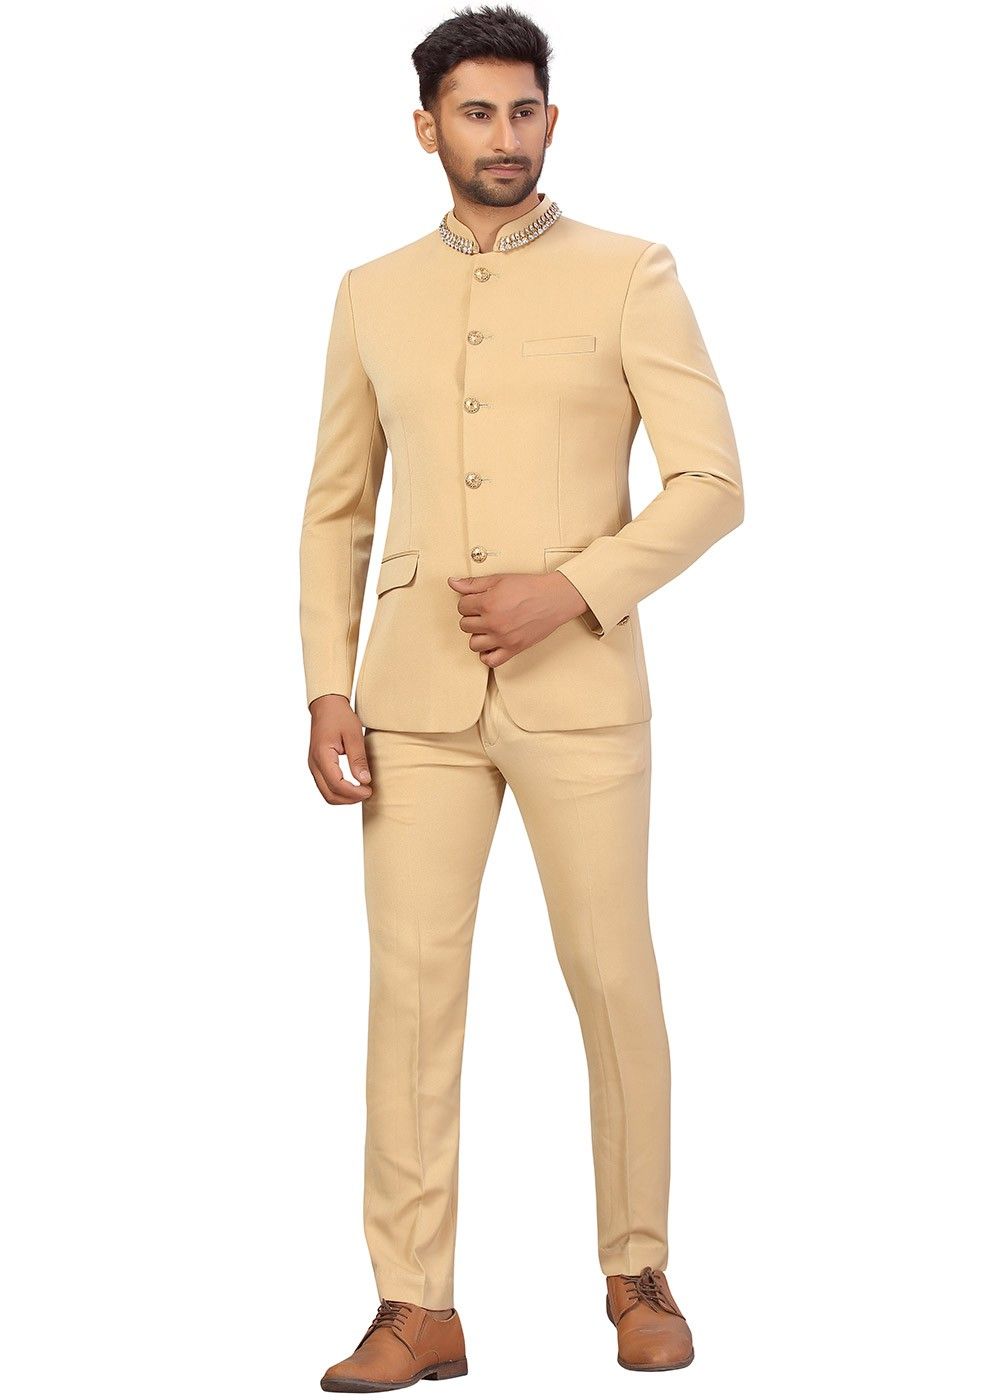 Buy Beige 3 Piece Suits Online In India - Etsy India